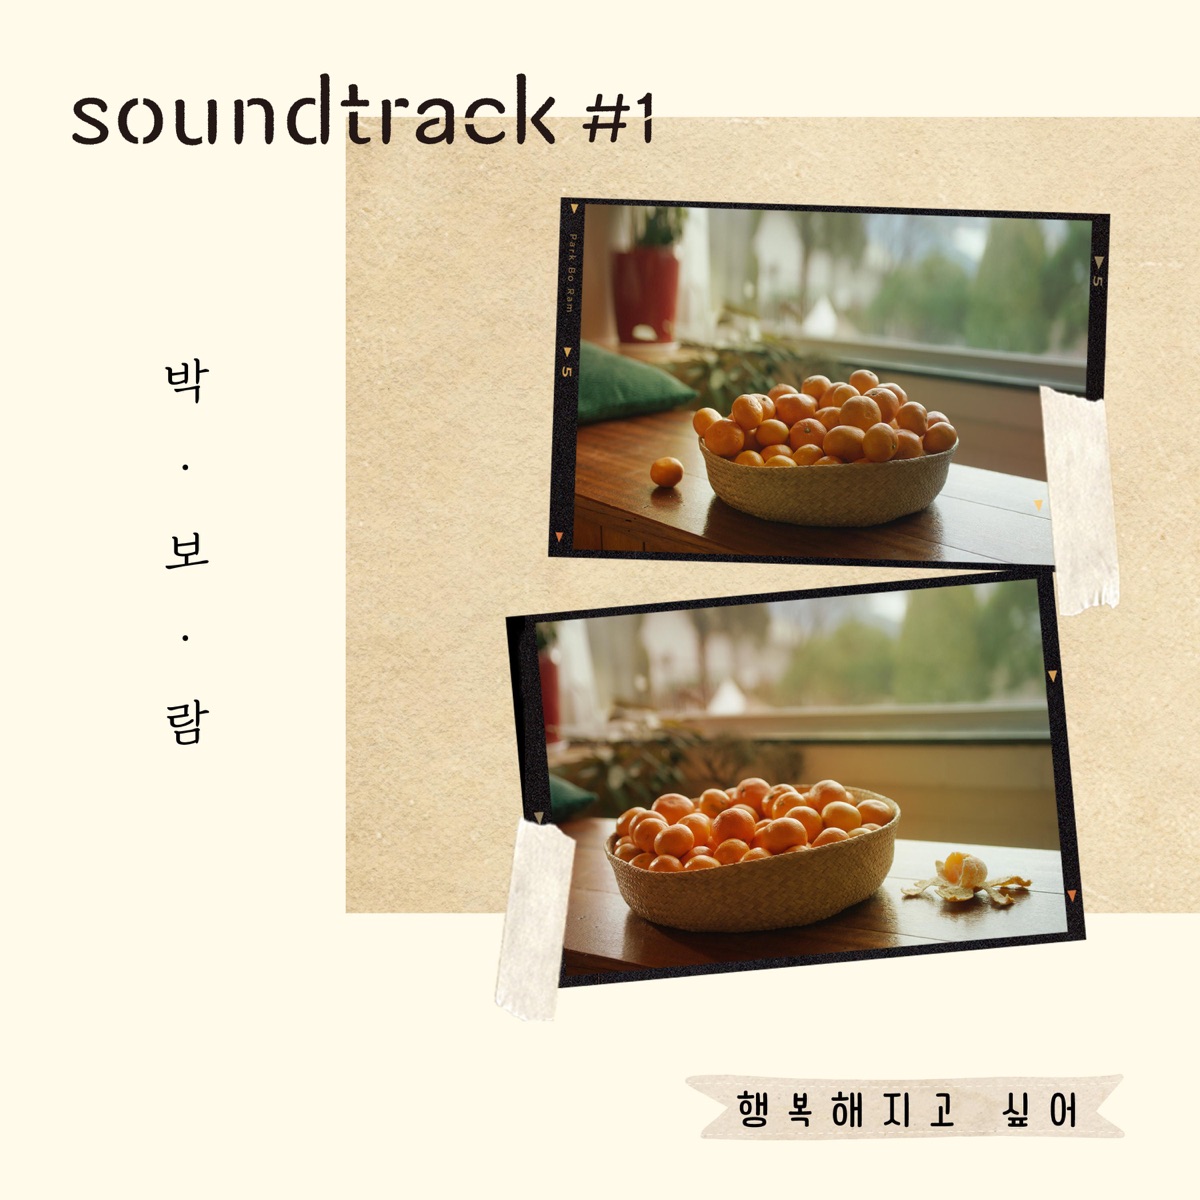 Park Boram – Want to be happy (From “soundtrack#1” [OST])